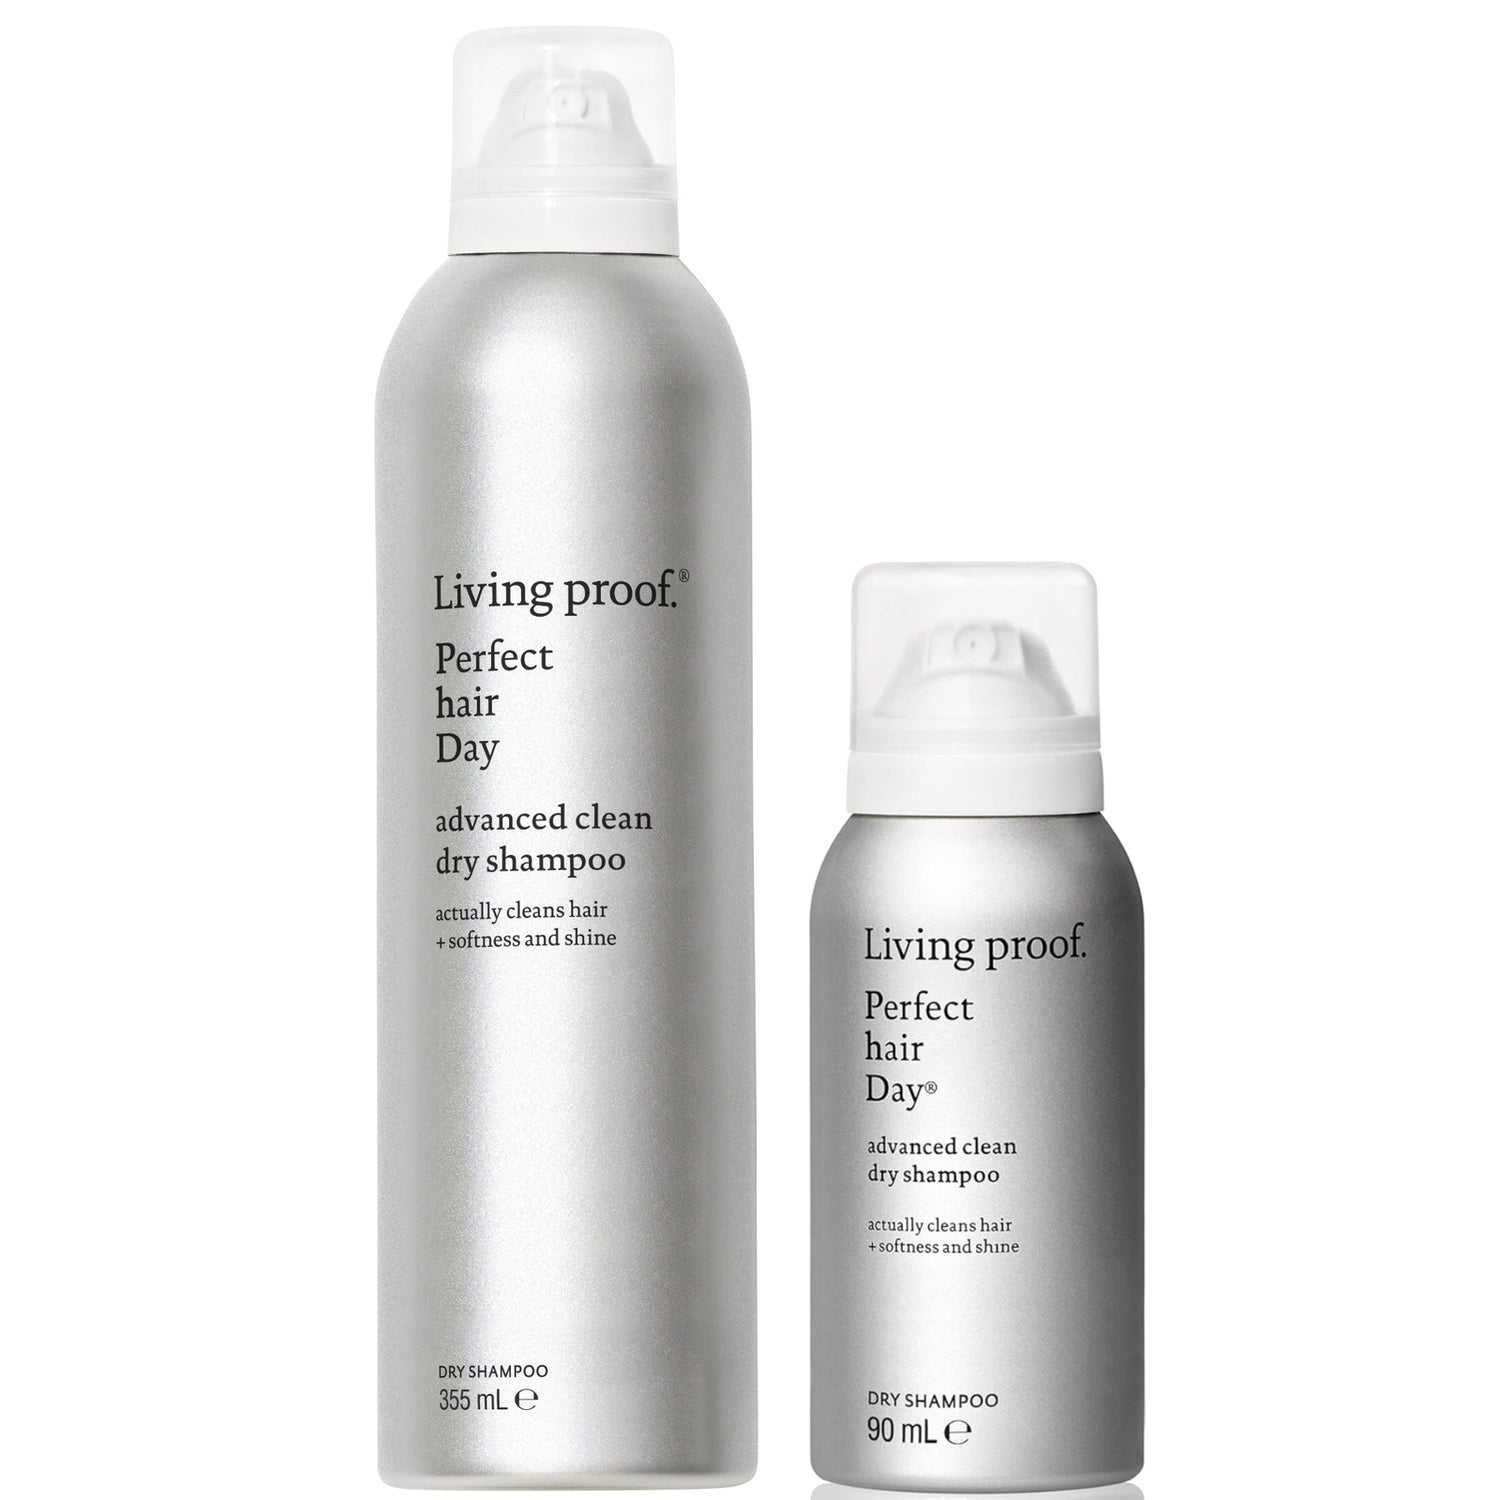 Living Proof Perfect Hair Day PhD Advanced Clean Dry Shampoo Duo